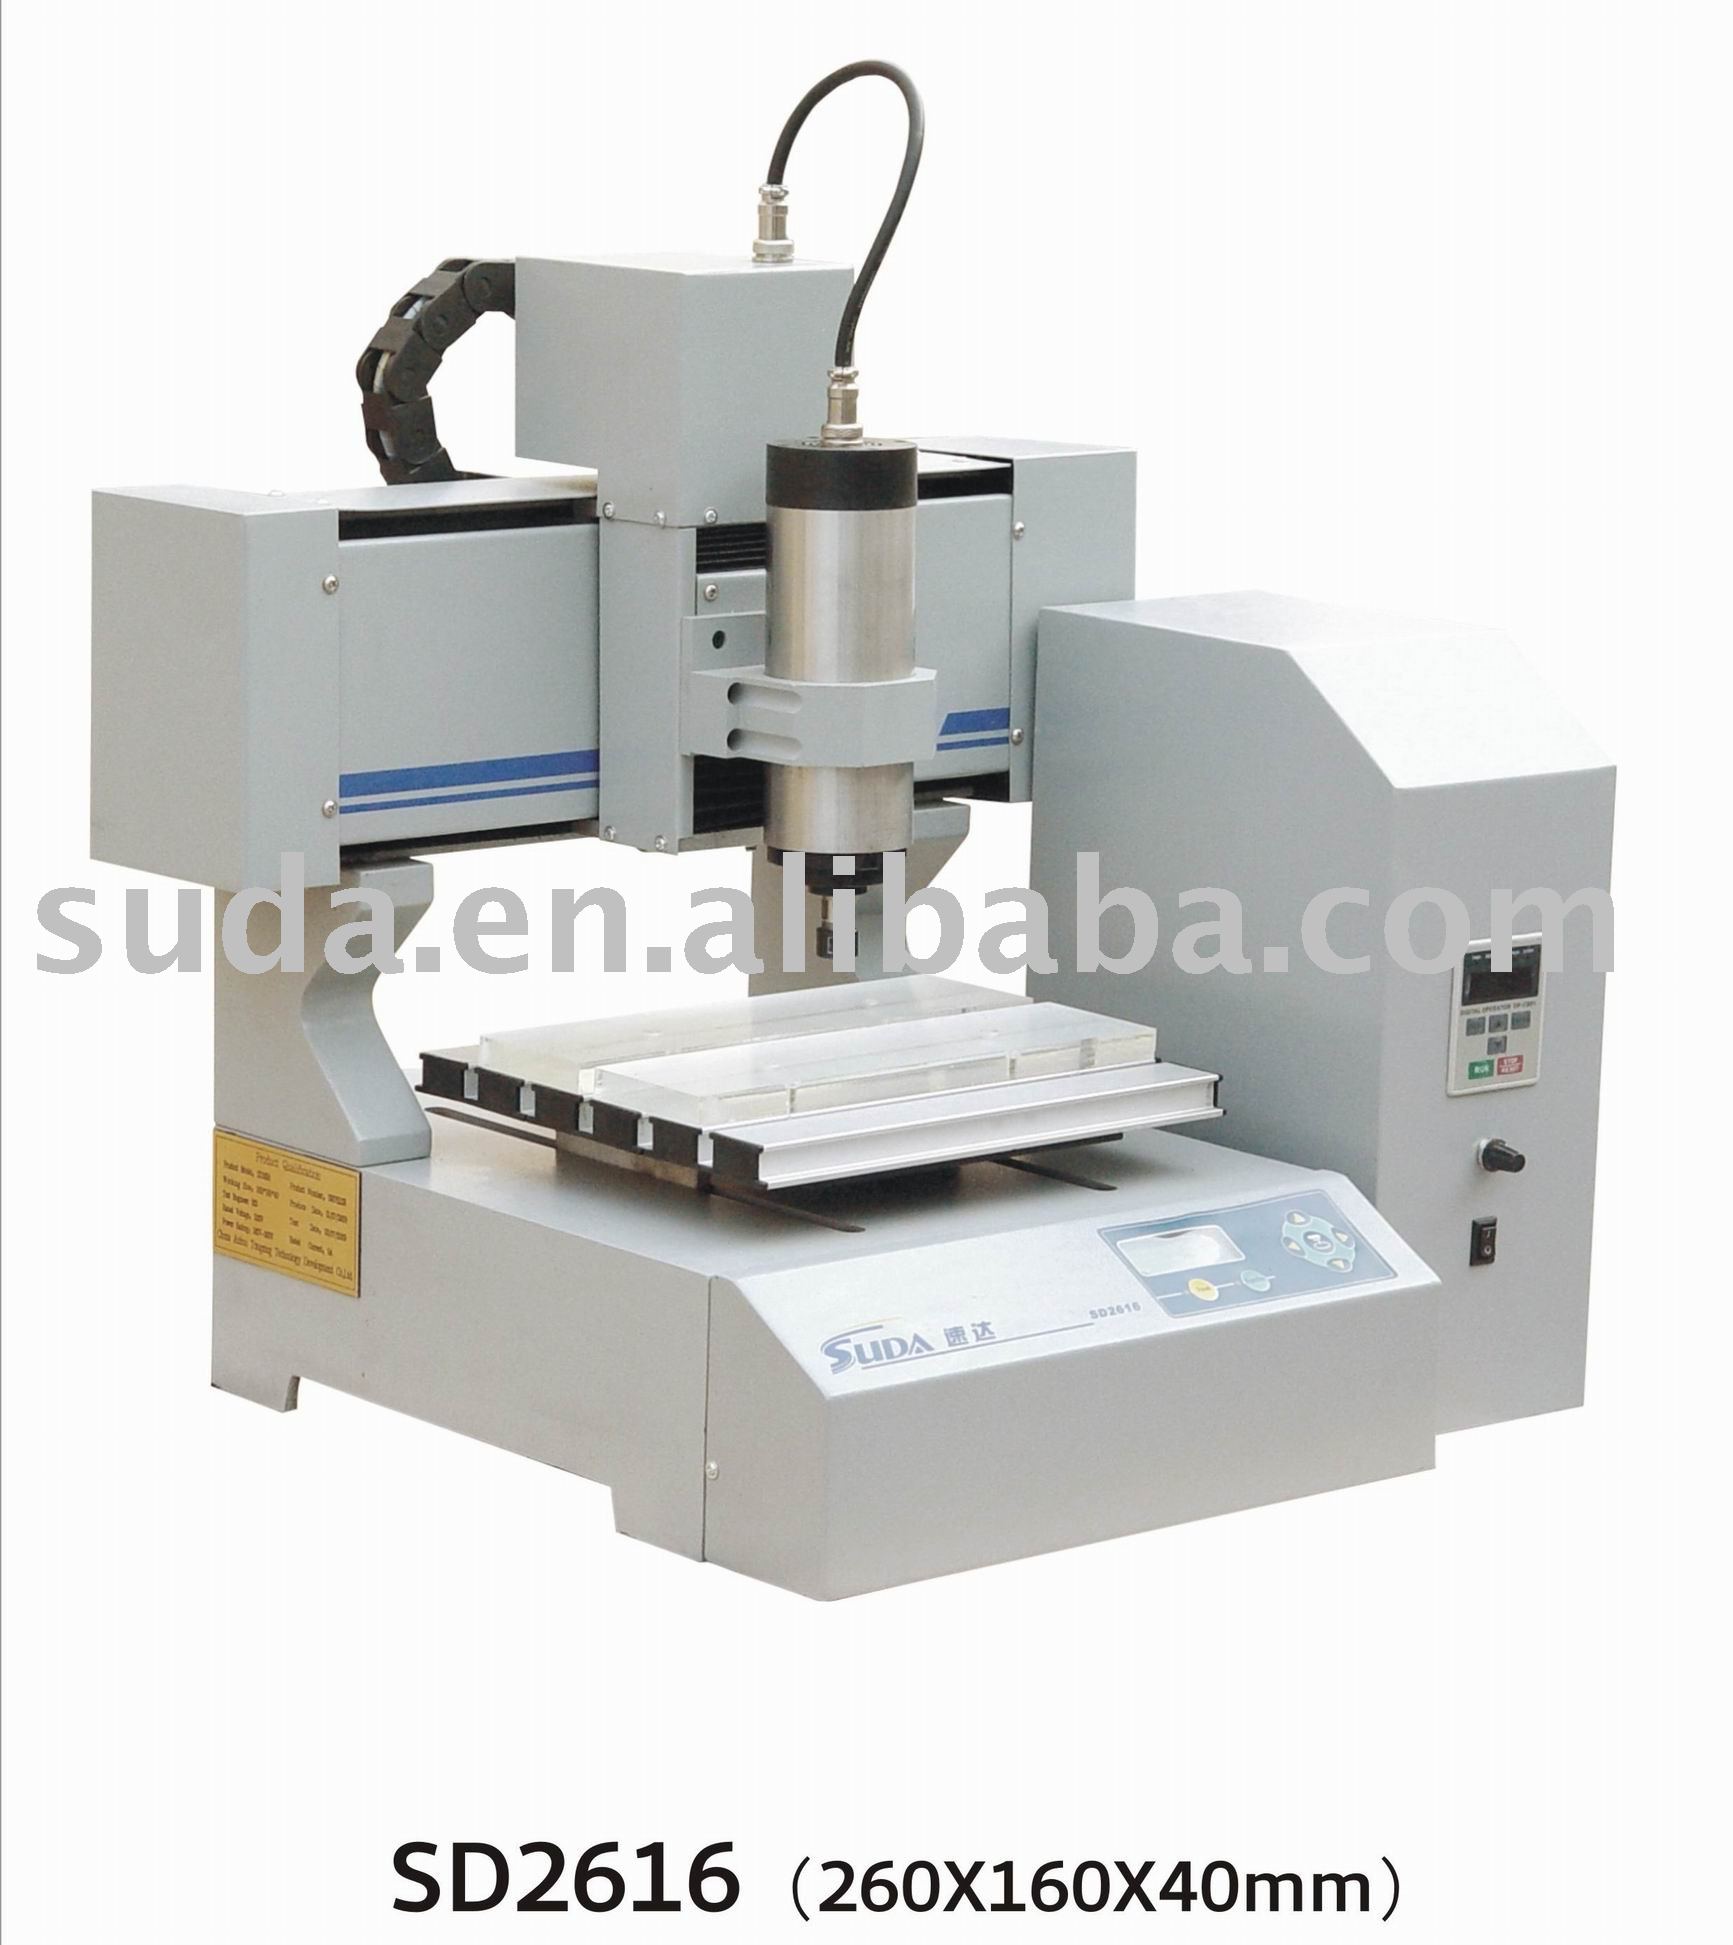 SUDA Small wood cnc router ,Model for SD2616